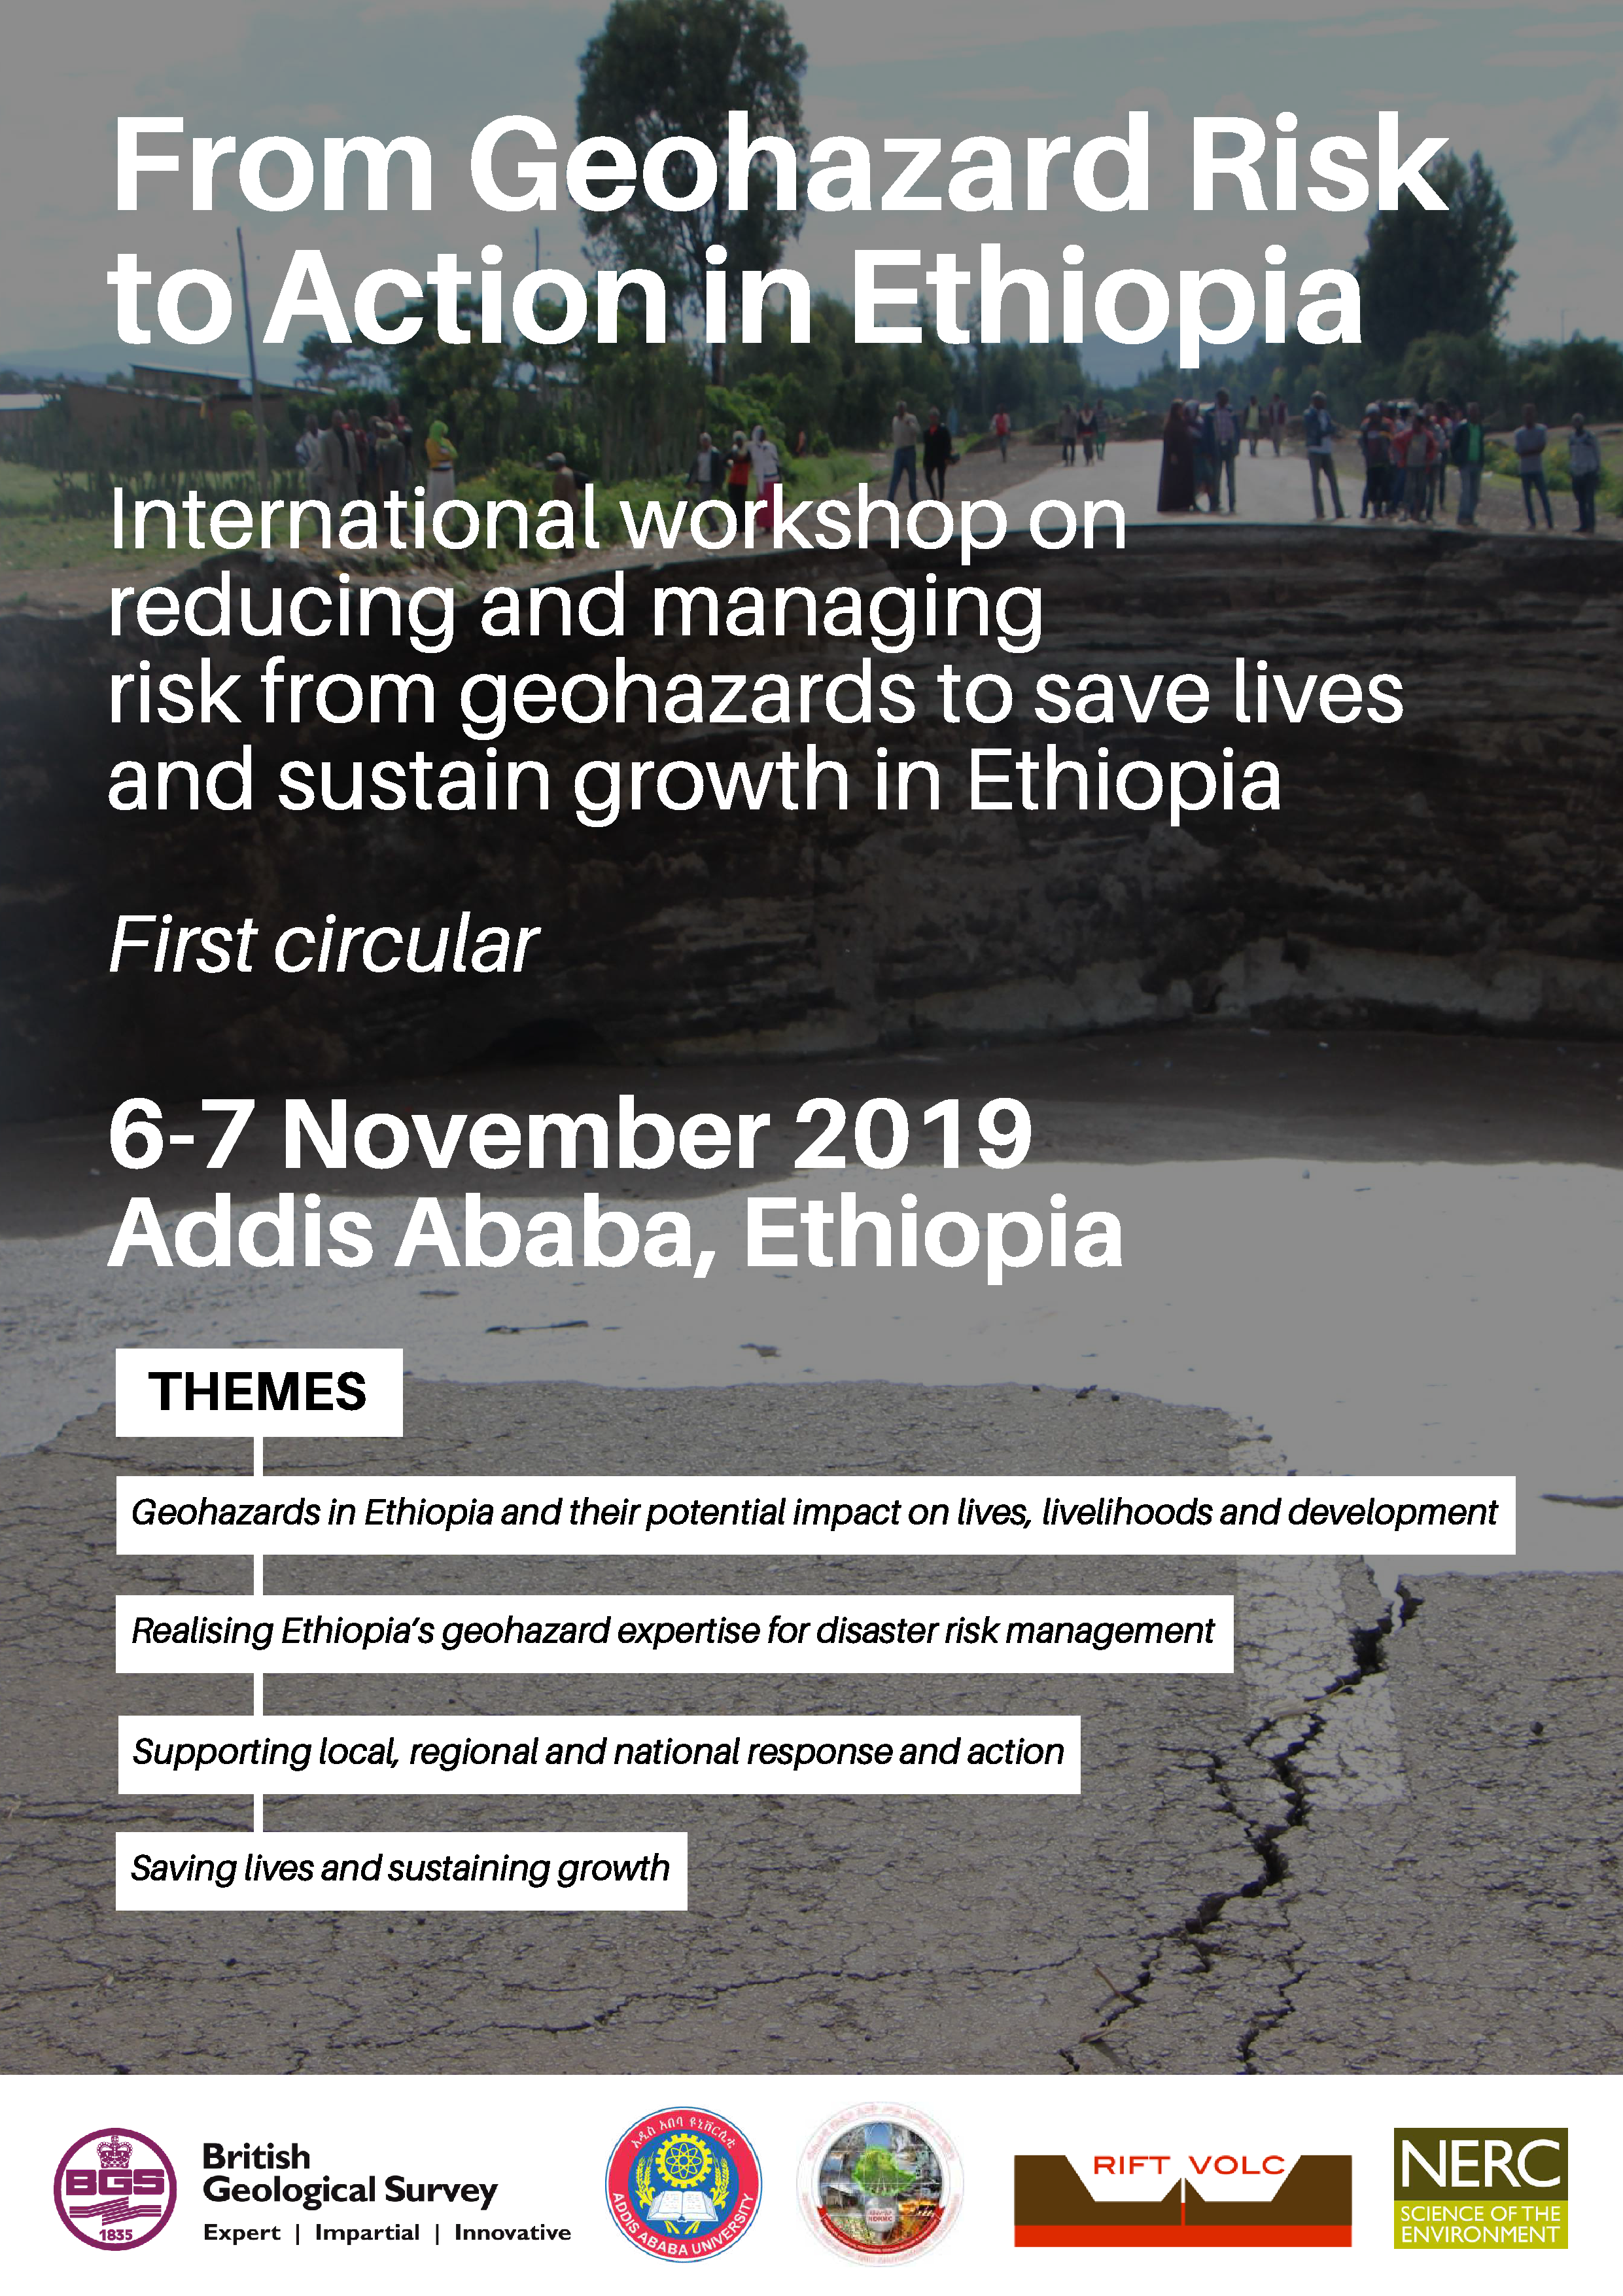 International workshop on reducing and managing risk from geohazards to save lives  and sustain growth in Ethiopia    6-7 November 2019 Addis Ababa, Ethiopia